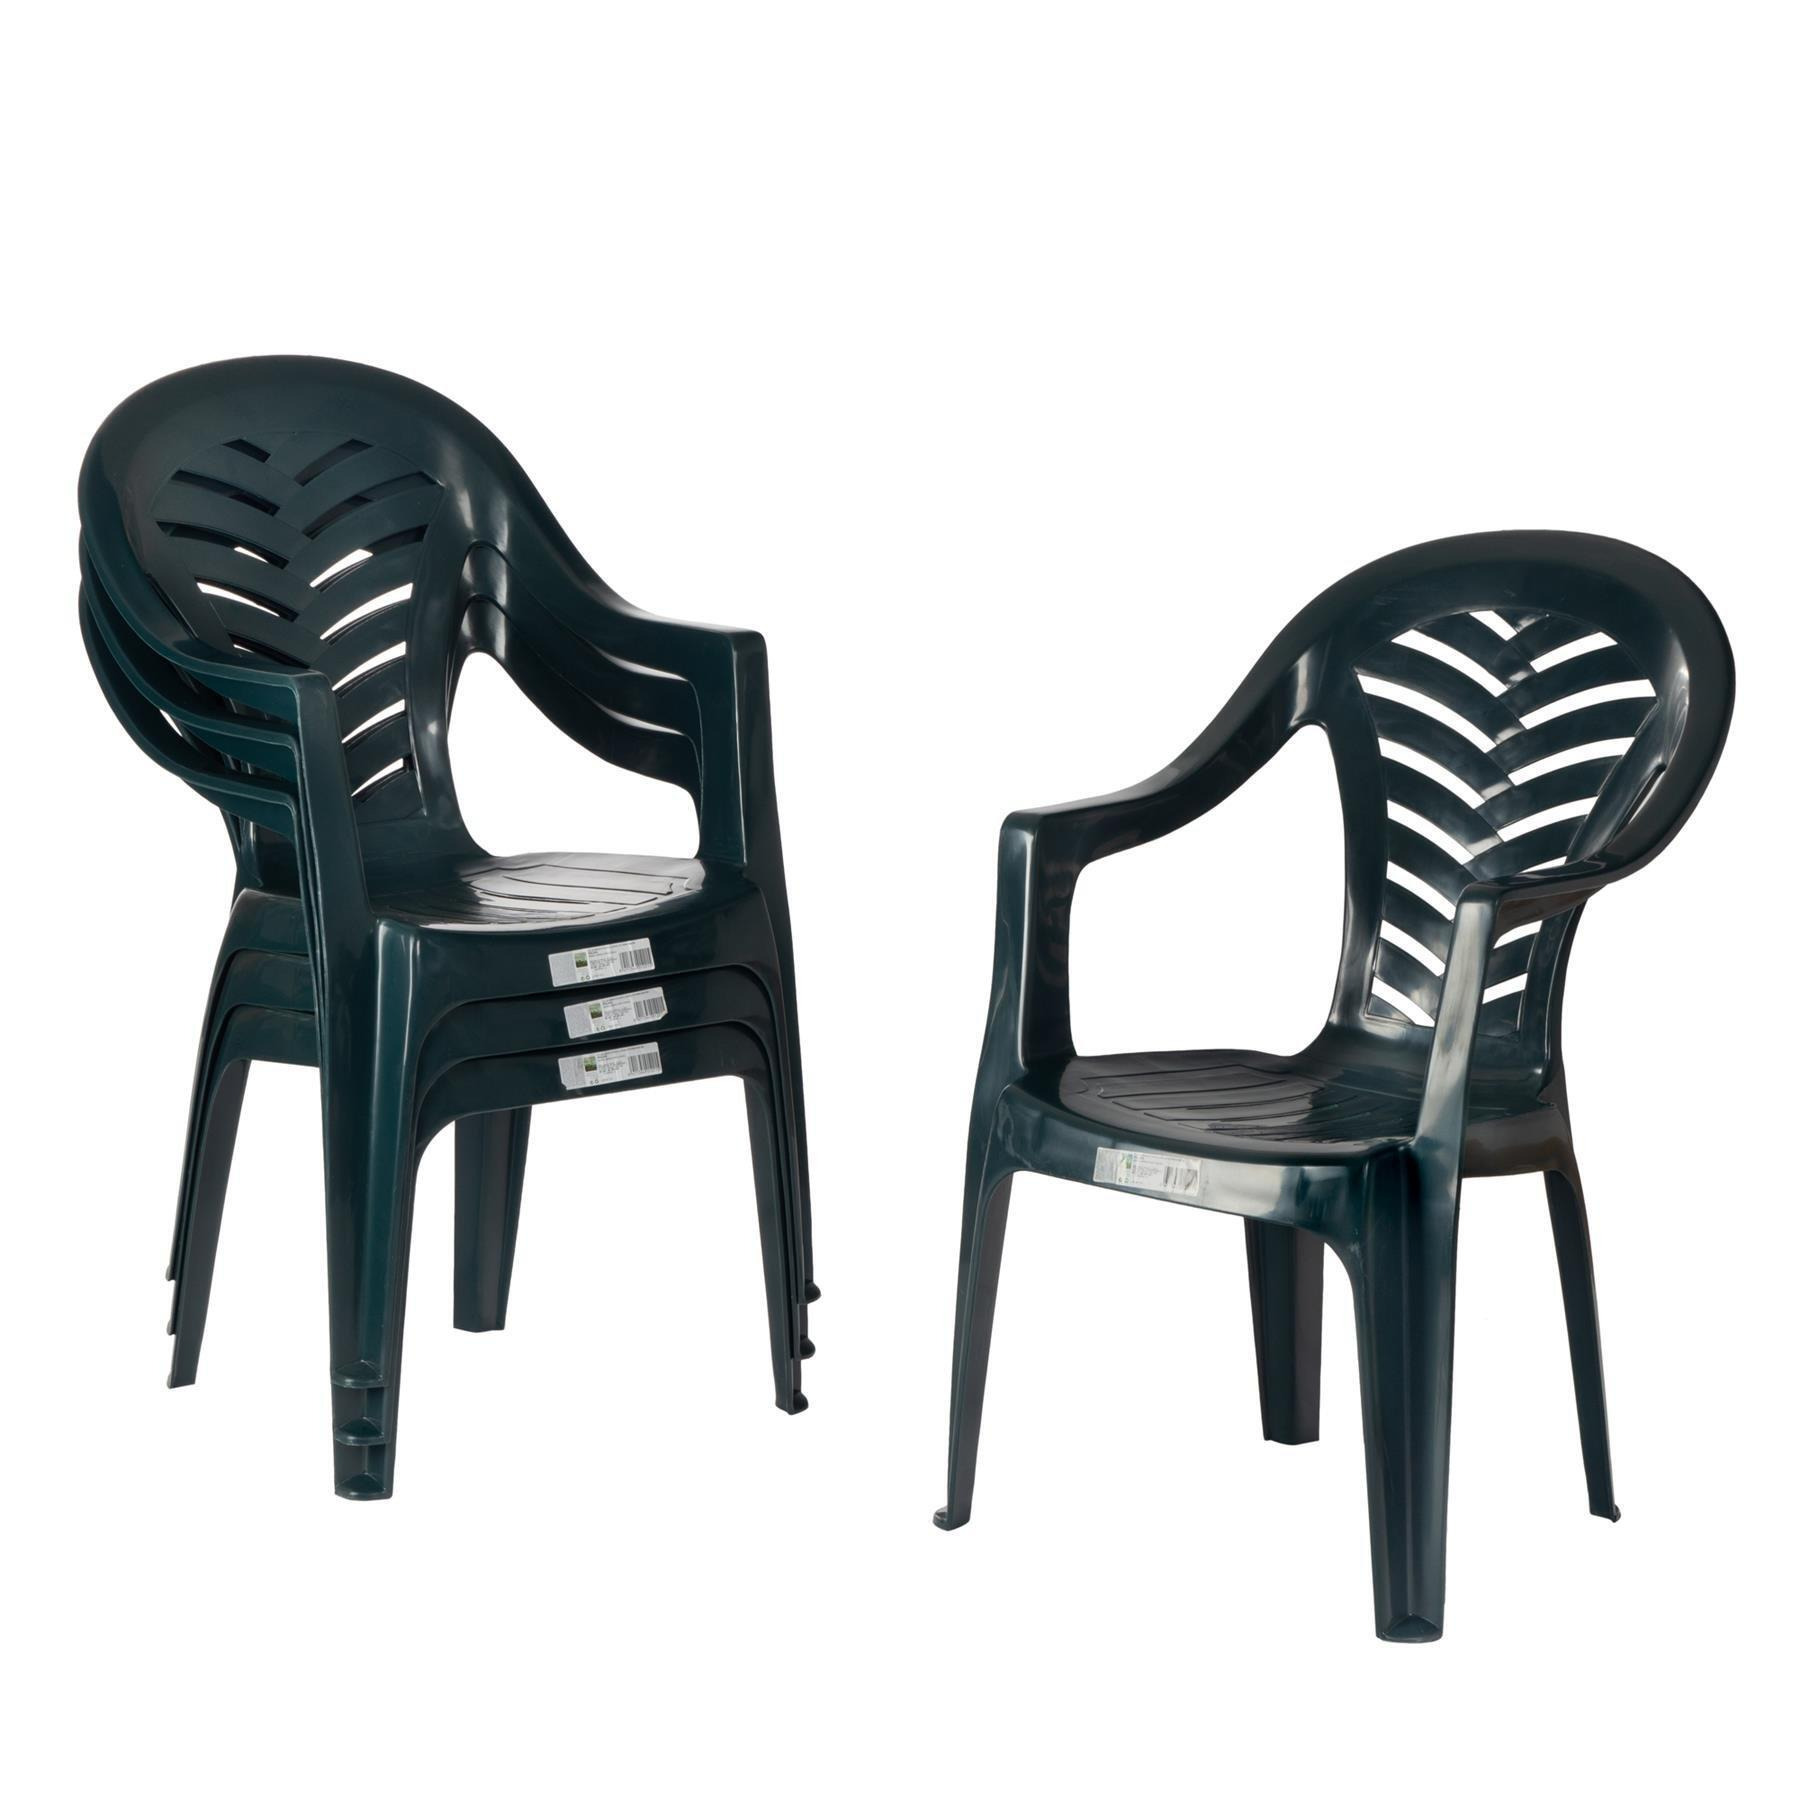 Palma Garden Dining Chairs Pack of 8 - image 1